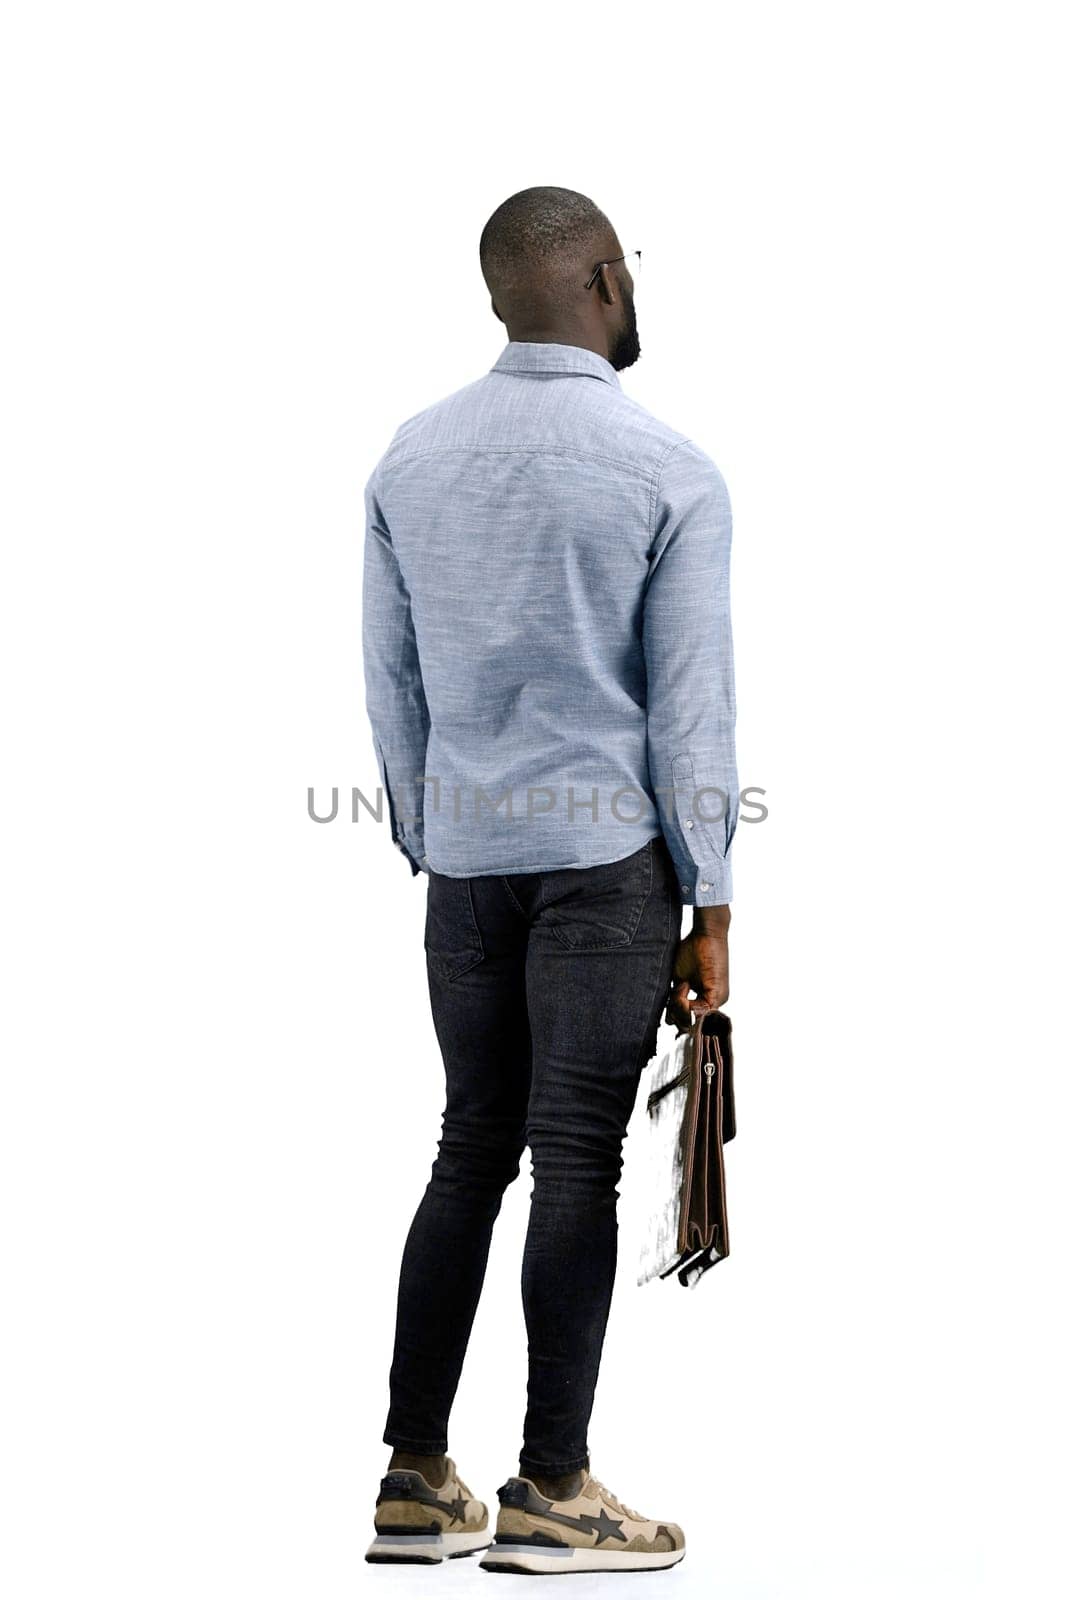 A man, full-length, on a white background, with a briefcase by Prosto